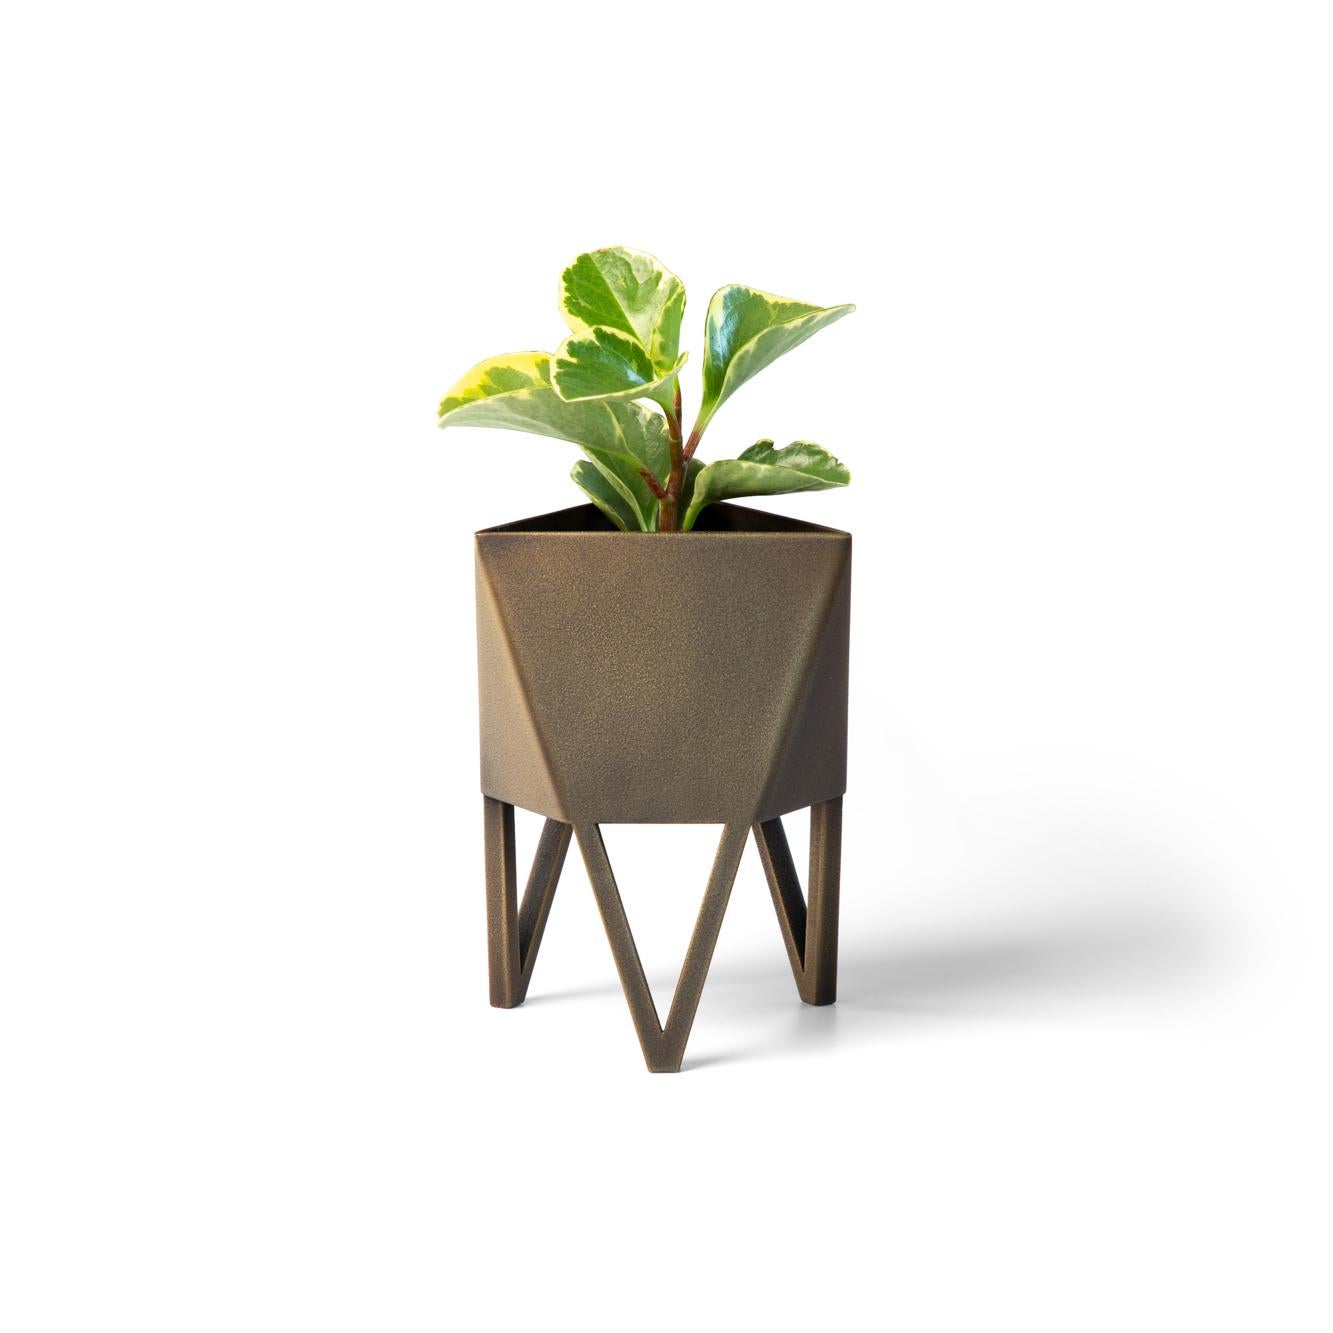 Deca Planter in White By Force/Collide, Size Mini, 2023 For Sale 9